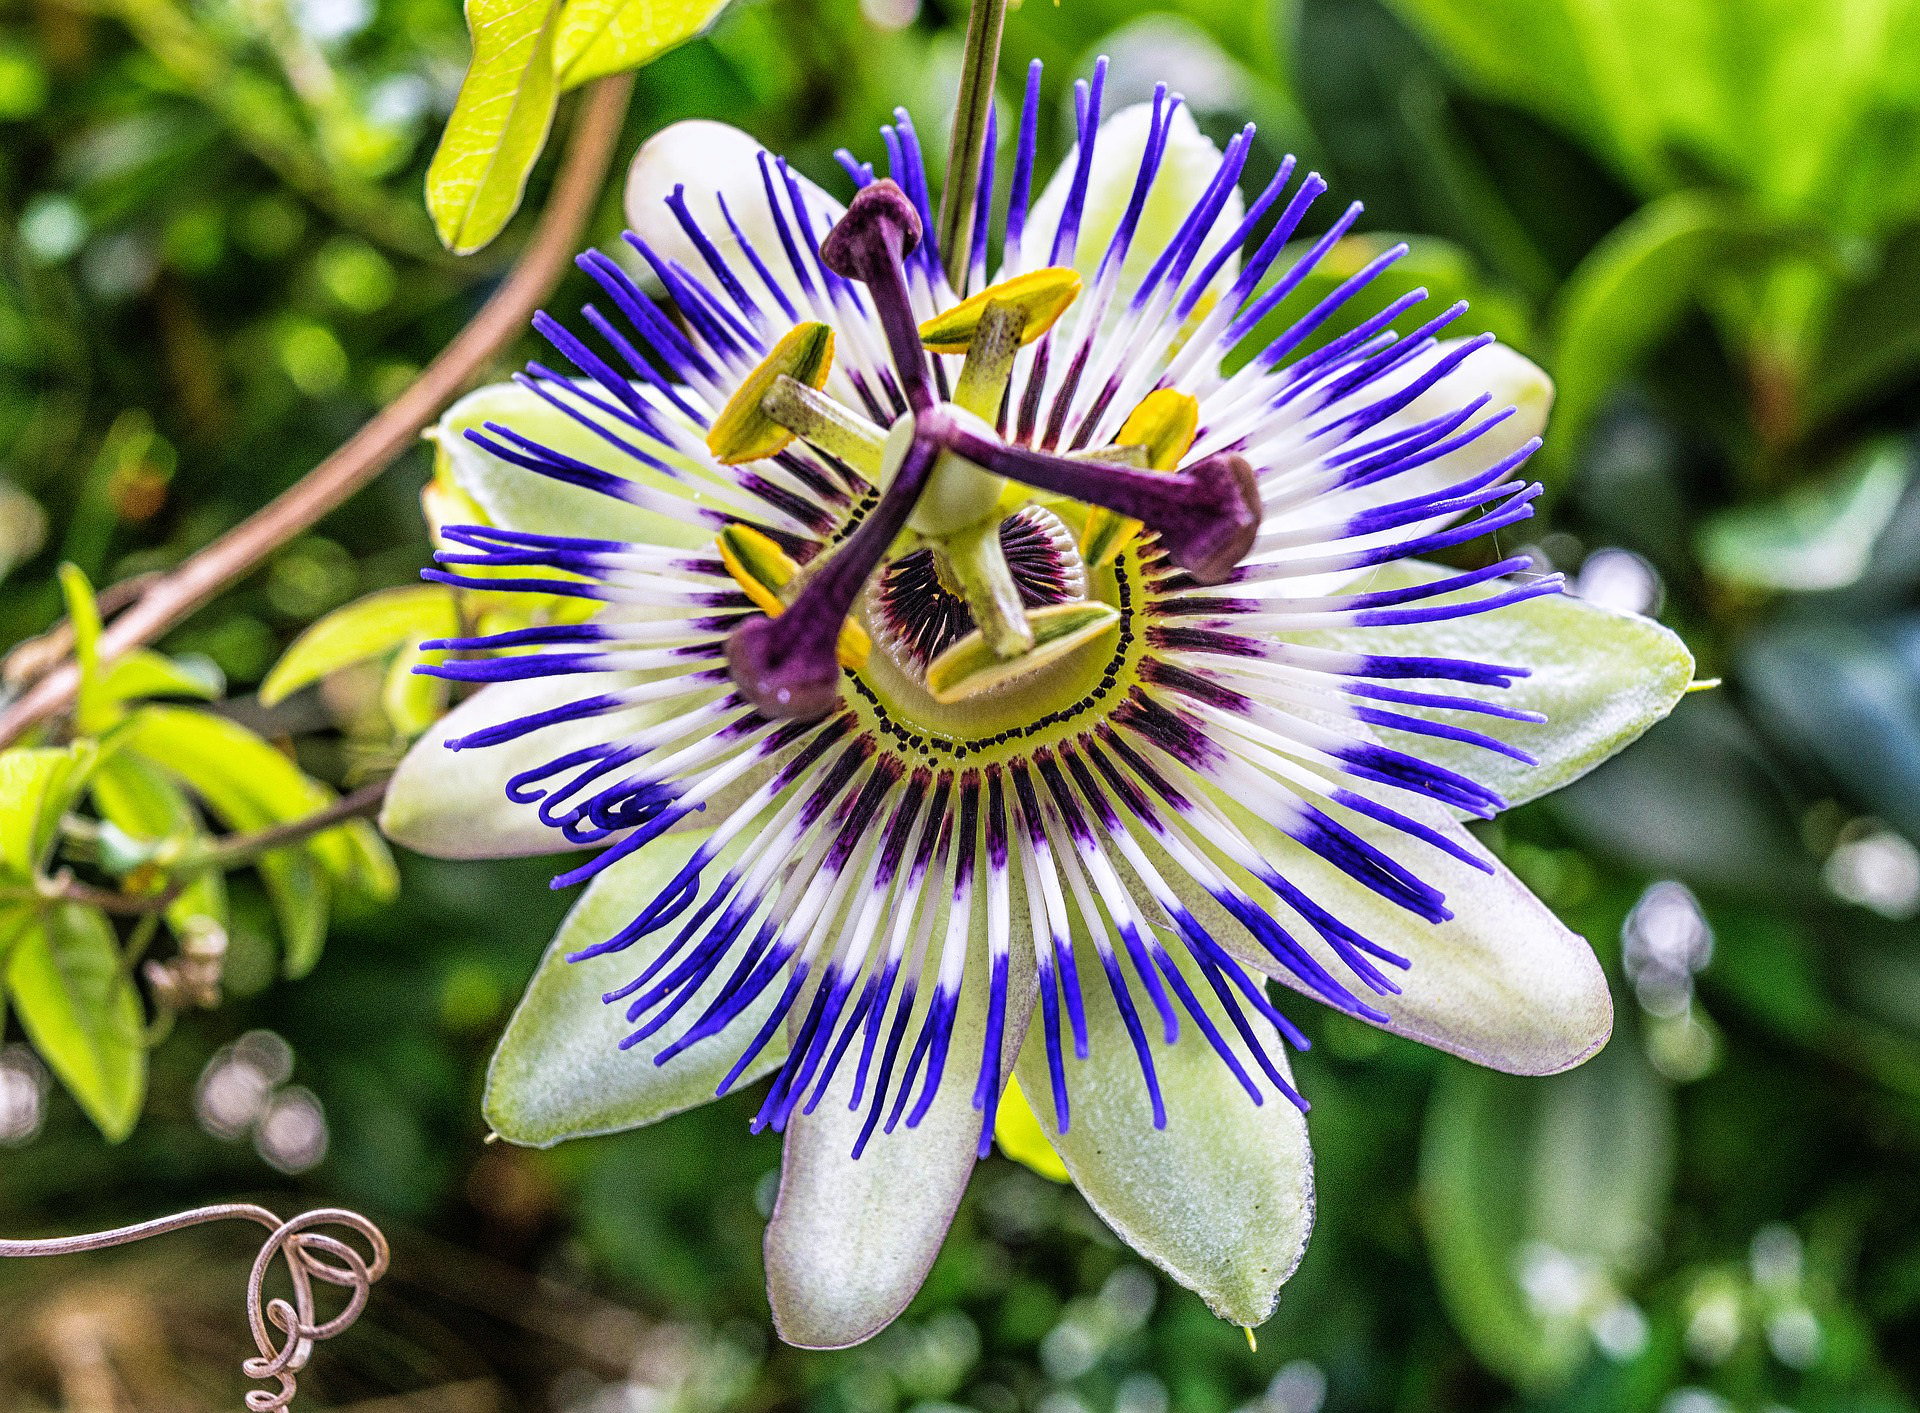 passionflower for sleep